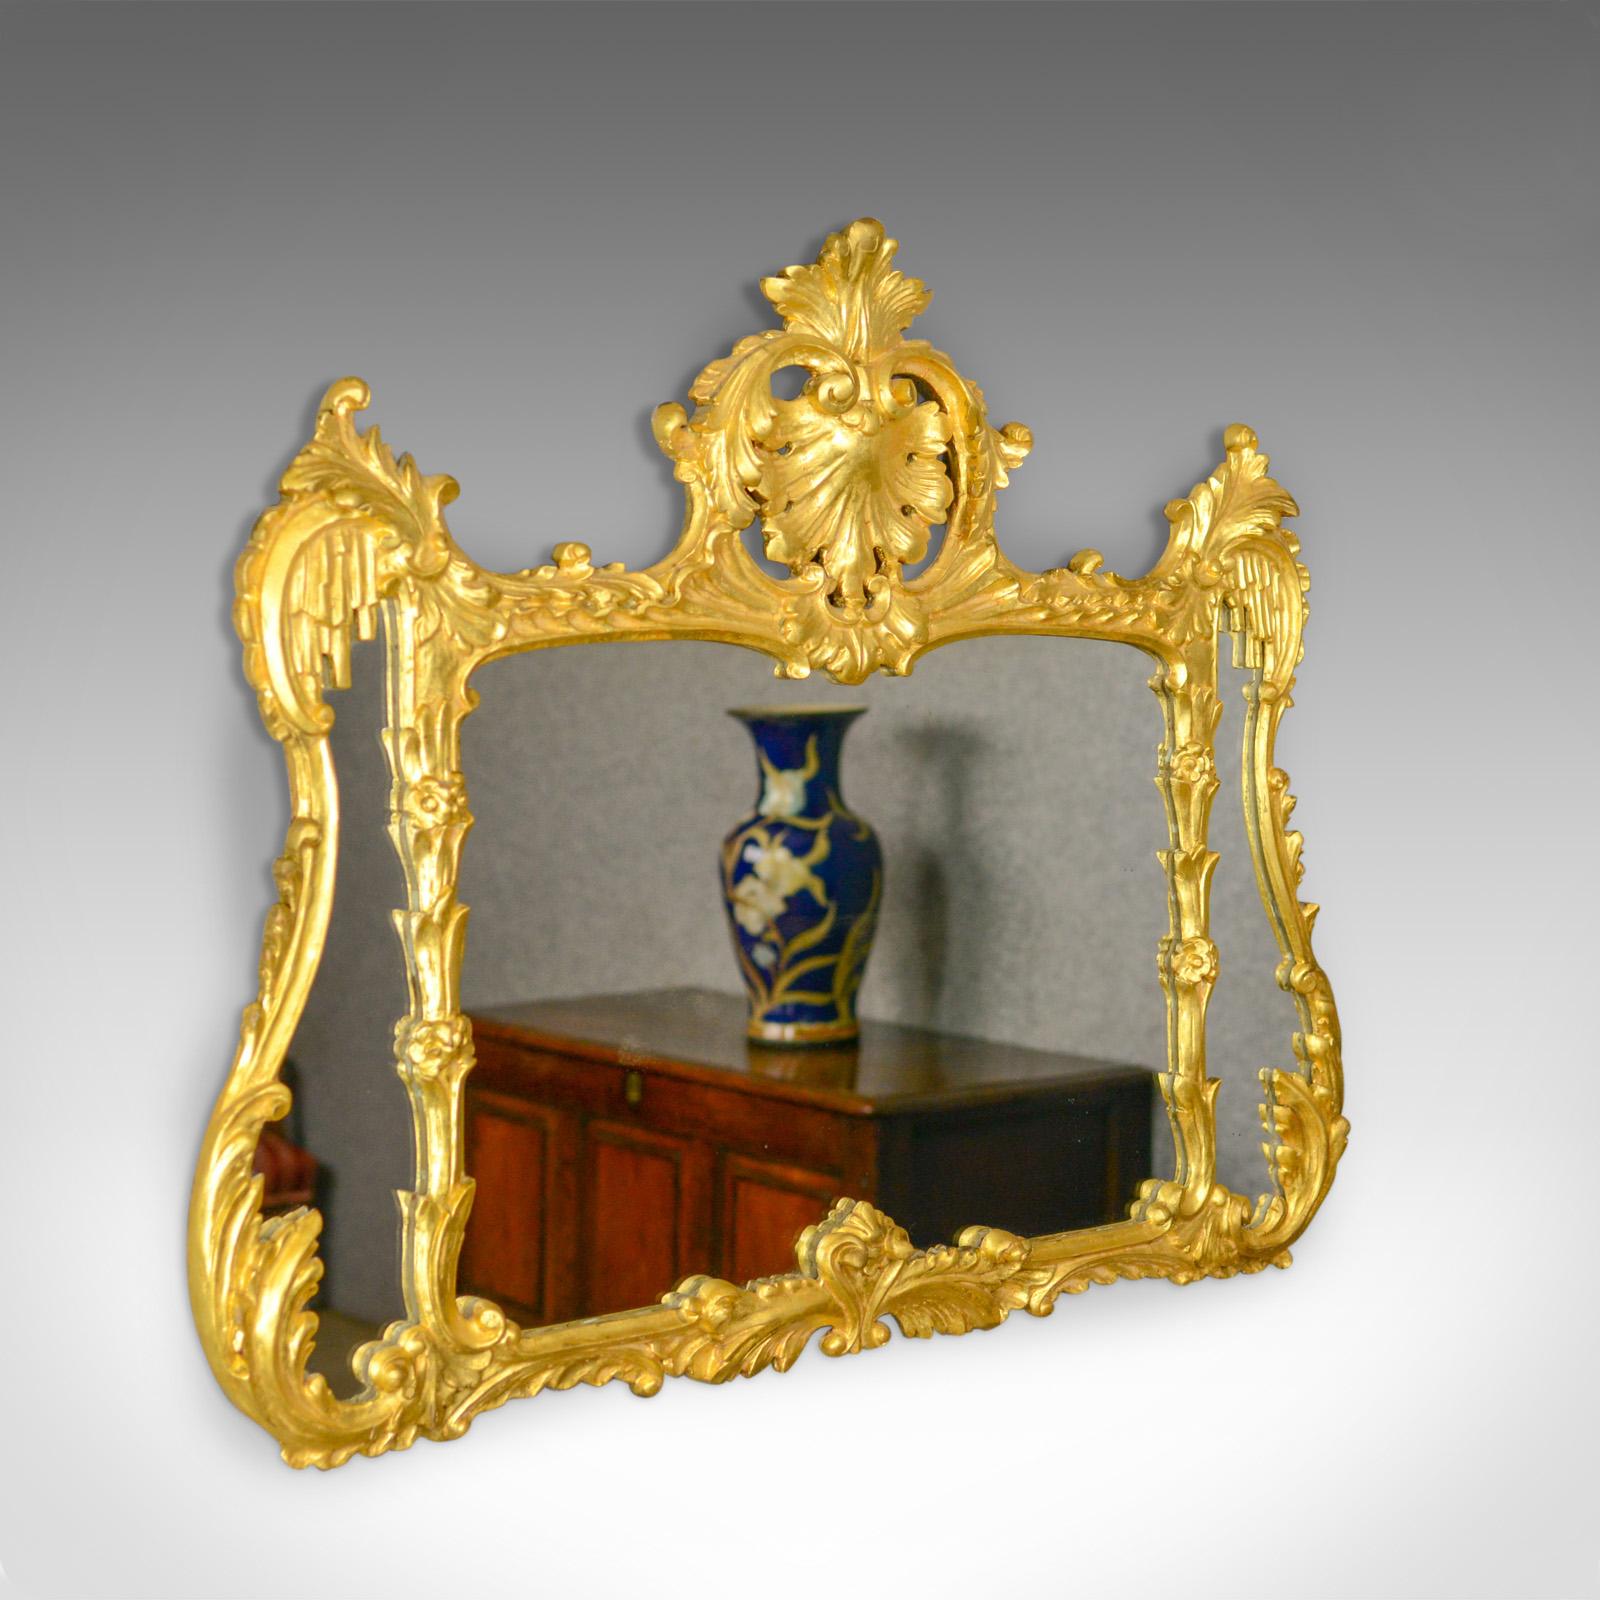 This is an antique overmantel mirror. An English, giltwood wall mirror divided as with a triptych and dating to circa 1920.

Attractive mellow golden tones in the giltwood frame
A quality piece in the Regency taste
Mid-sized and in good